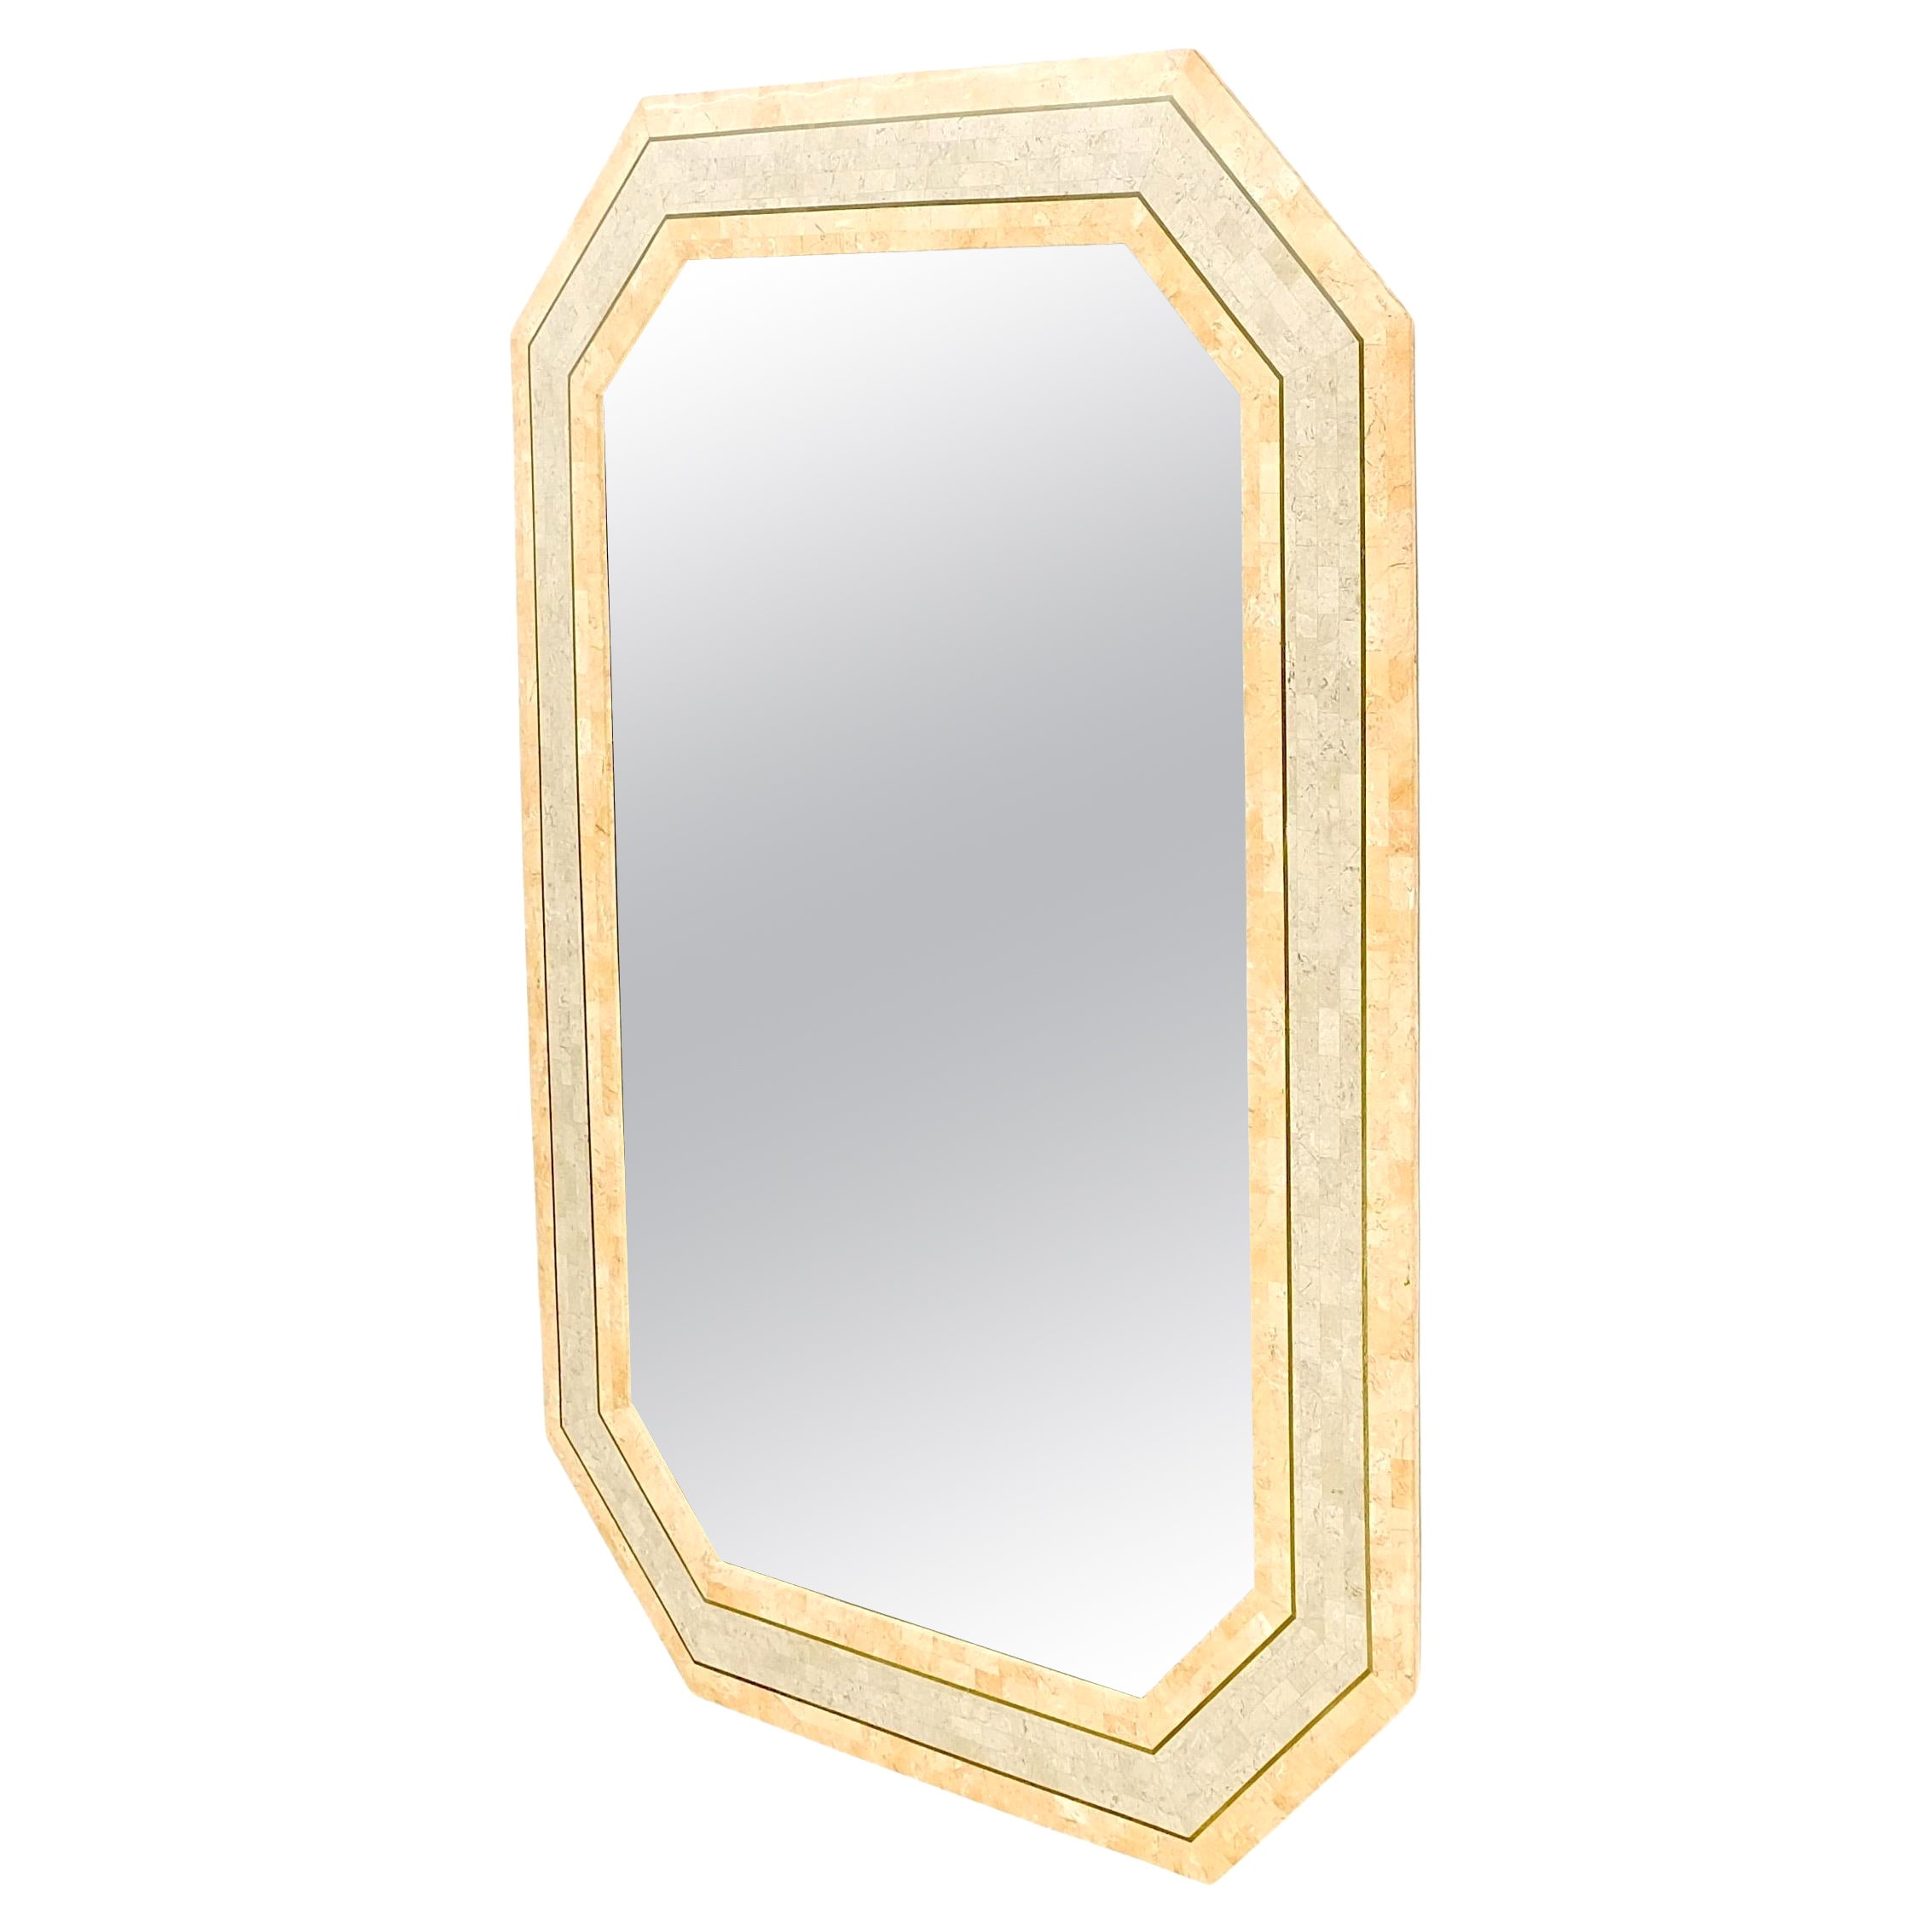 Tessellated Frame Octagonal Rectangle Shape Brass Inlay Wall Mirror Mint! For Sale